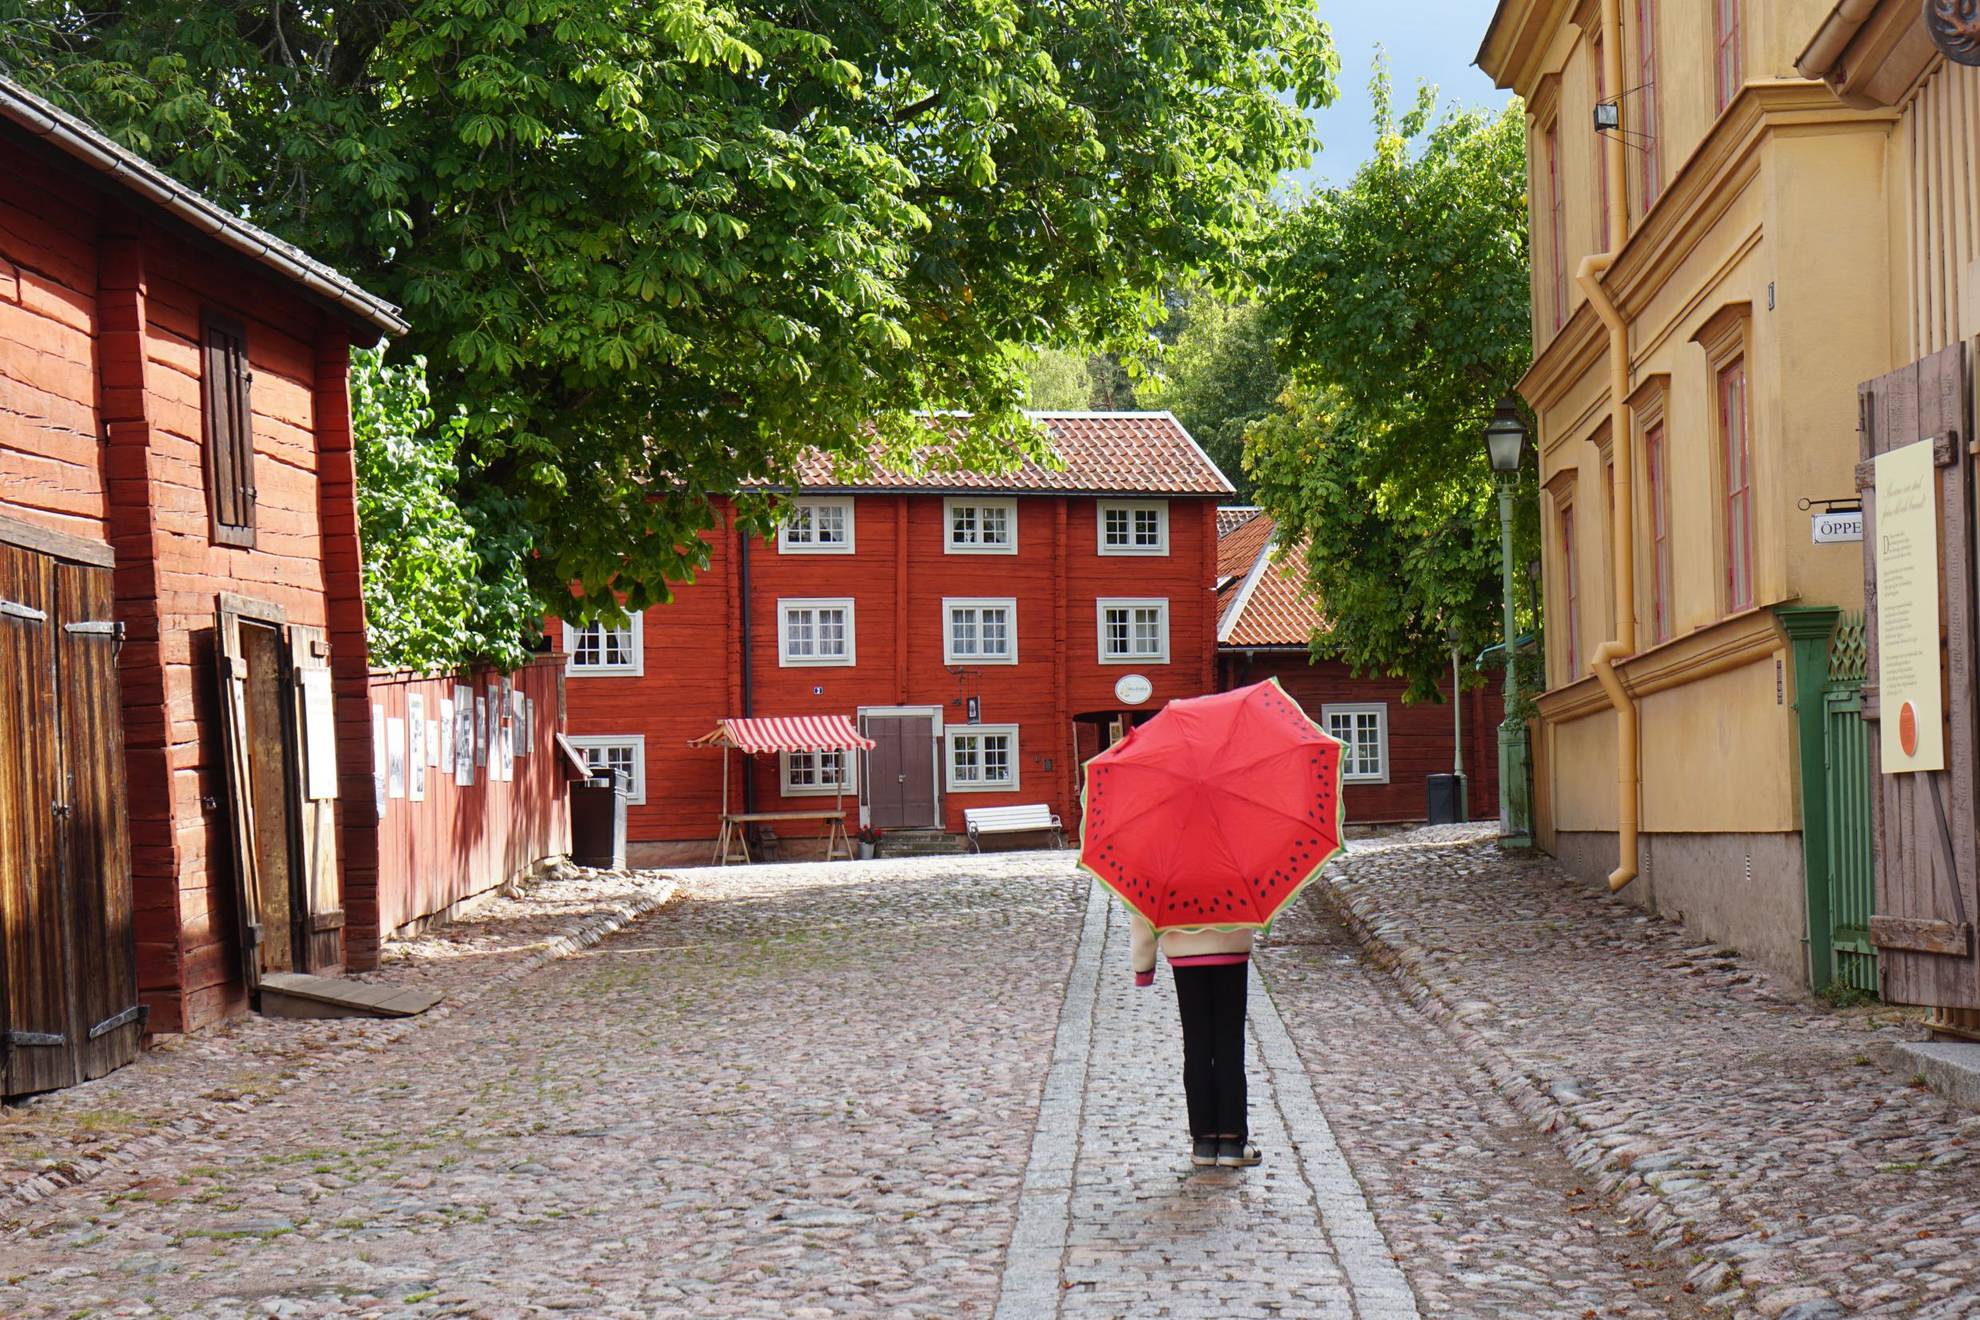 A person is walking with a red umbrella on a cobbled path between old houses